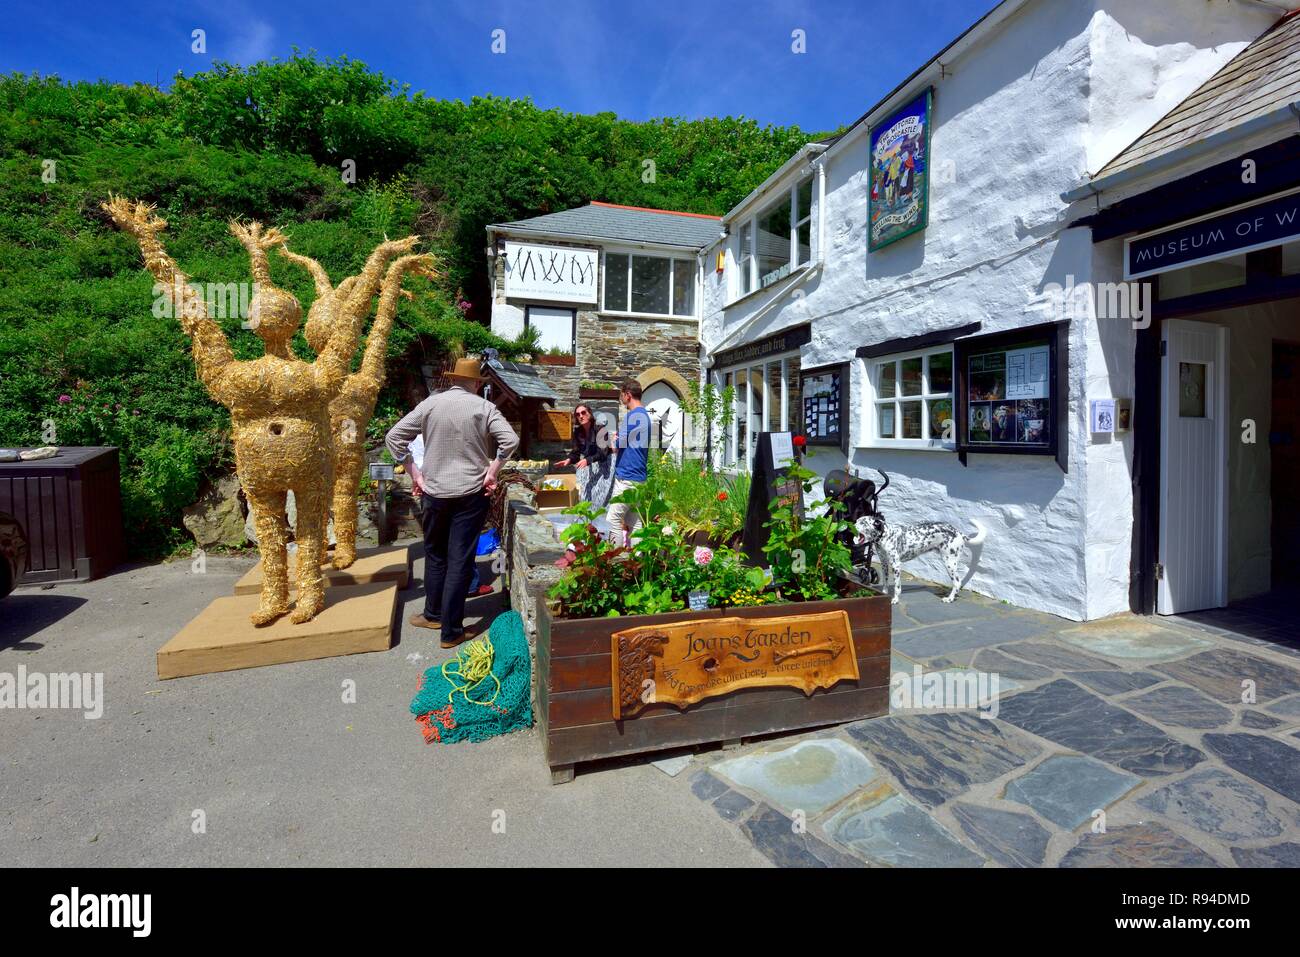 The witchcraft museum, Boscastle,Cornwall,England,UK Stock Photo